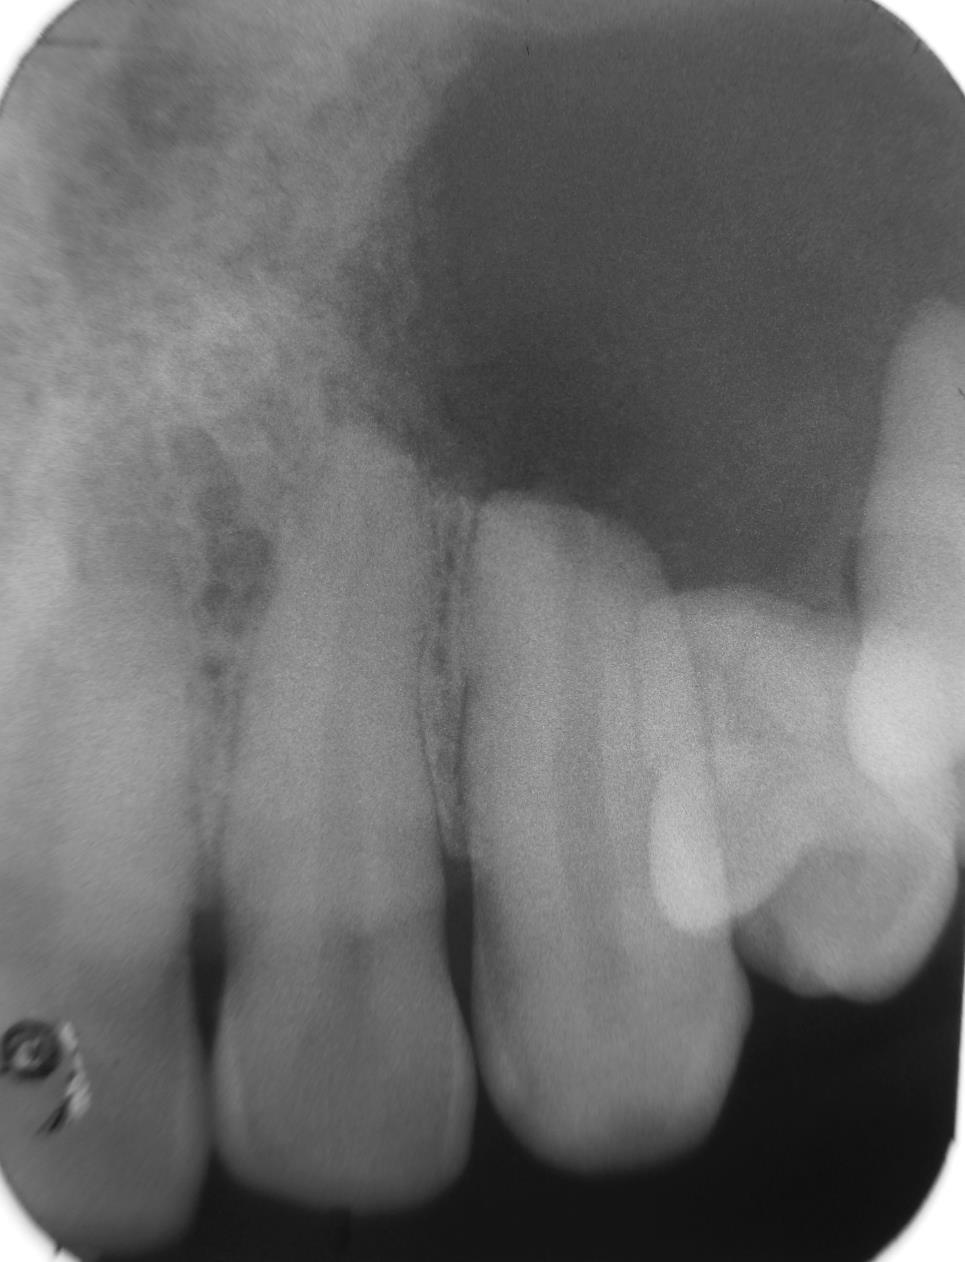 igure 3: Intraoral periapical radiograph with respect to 22, 23, 24, 25 showing